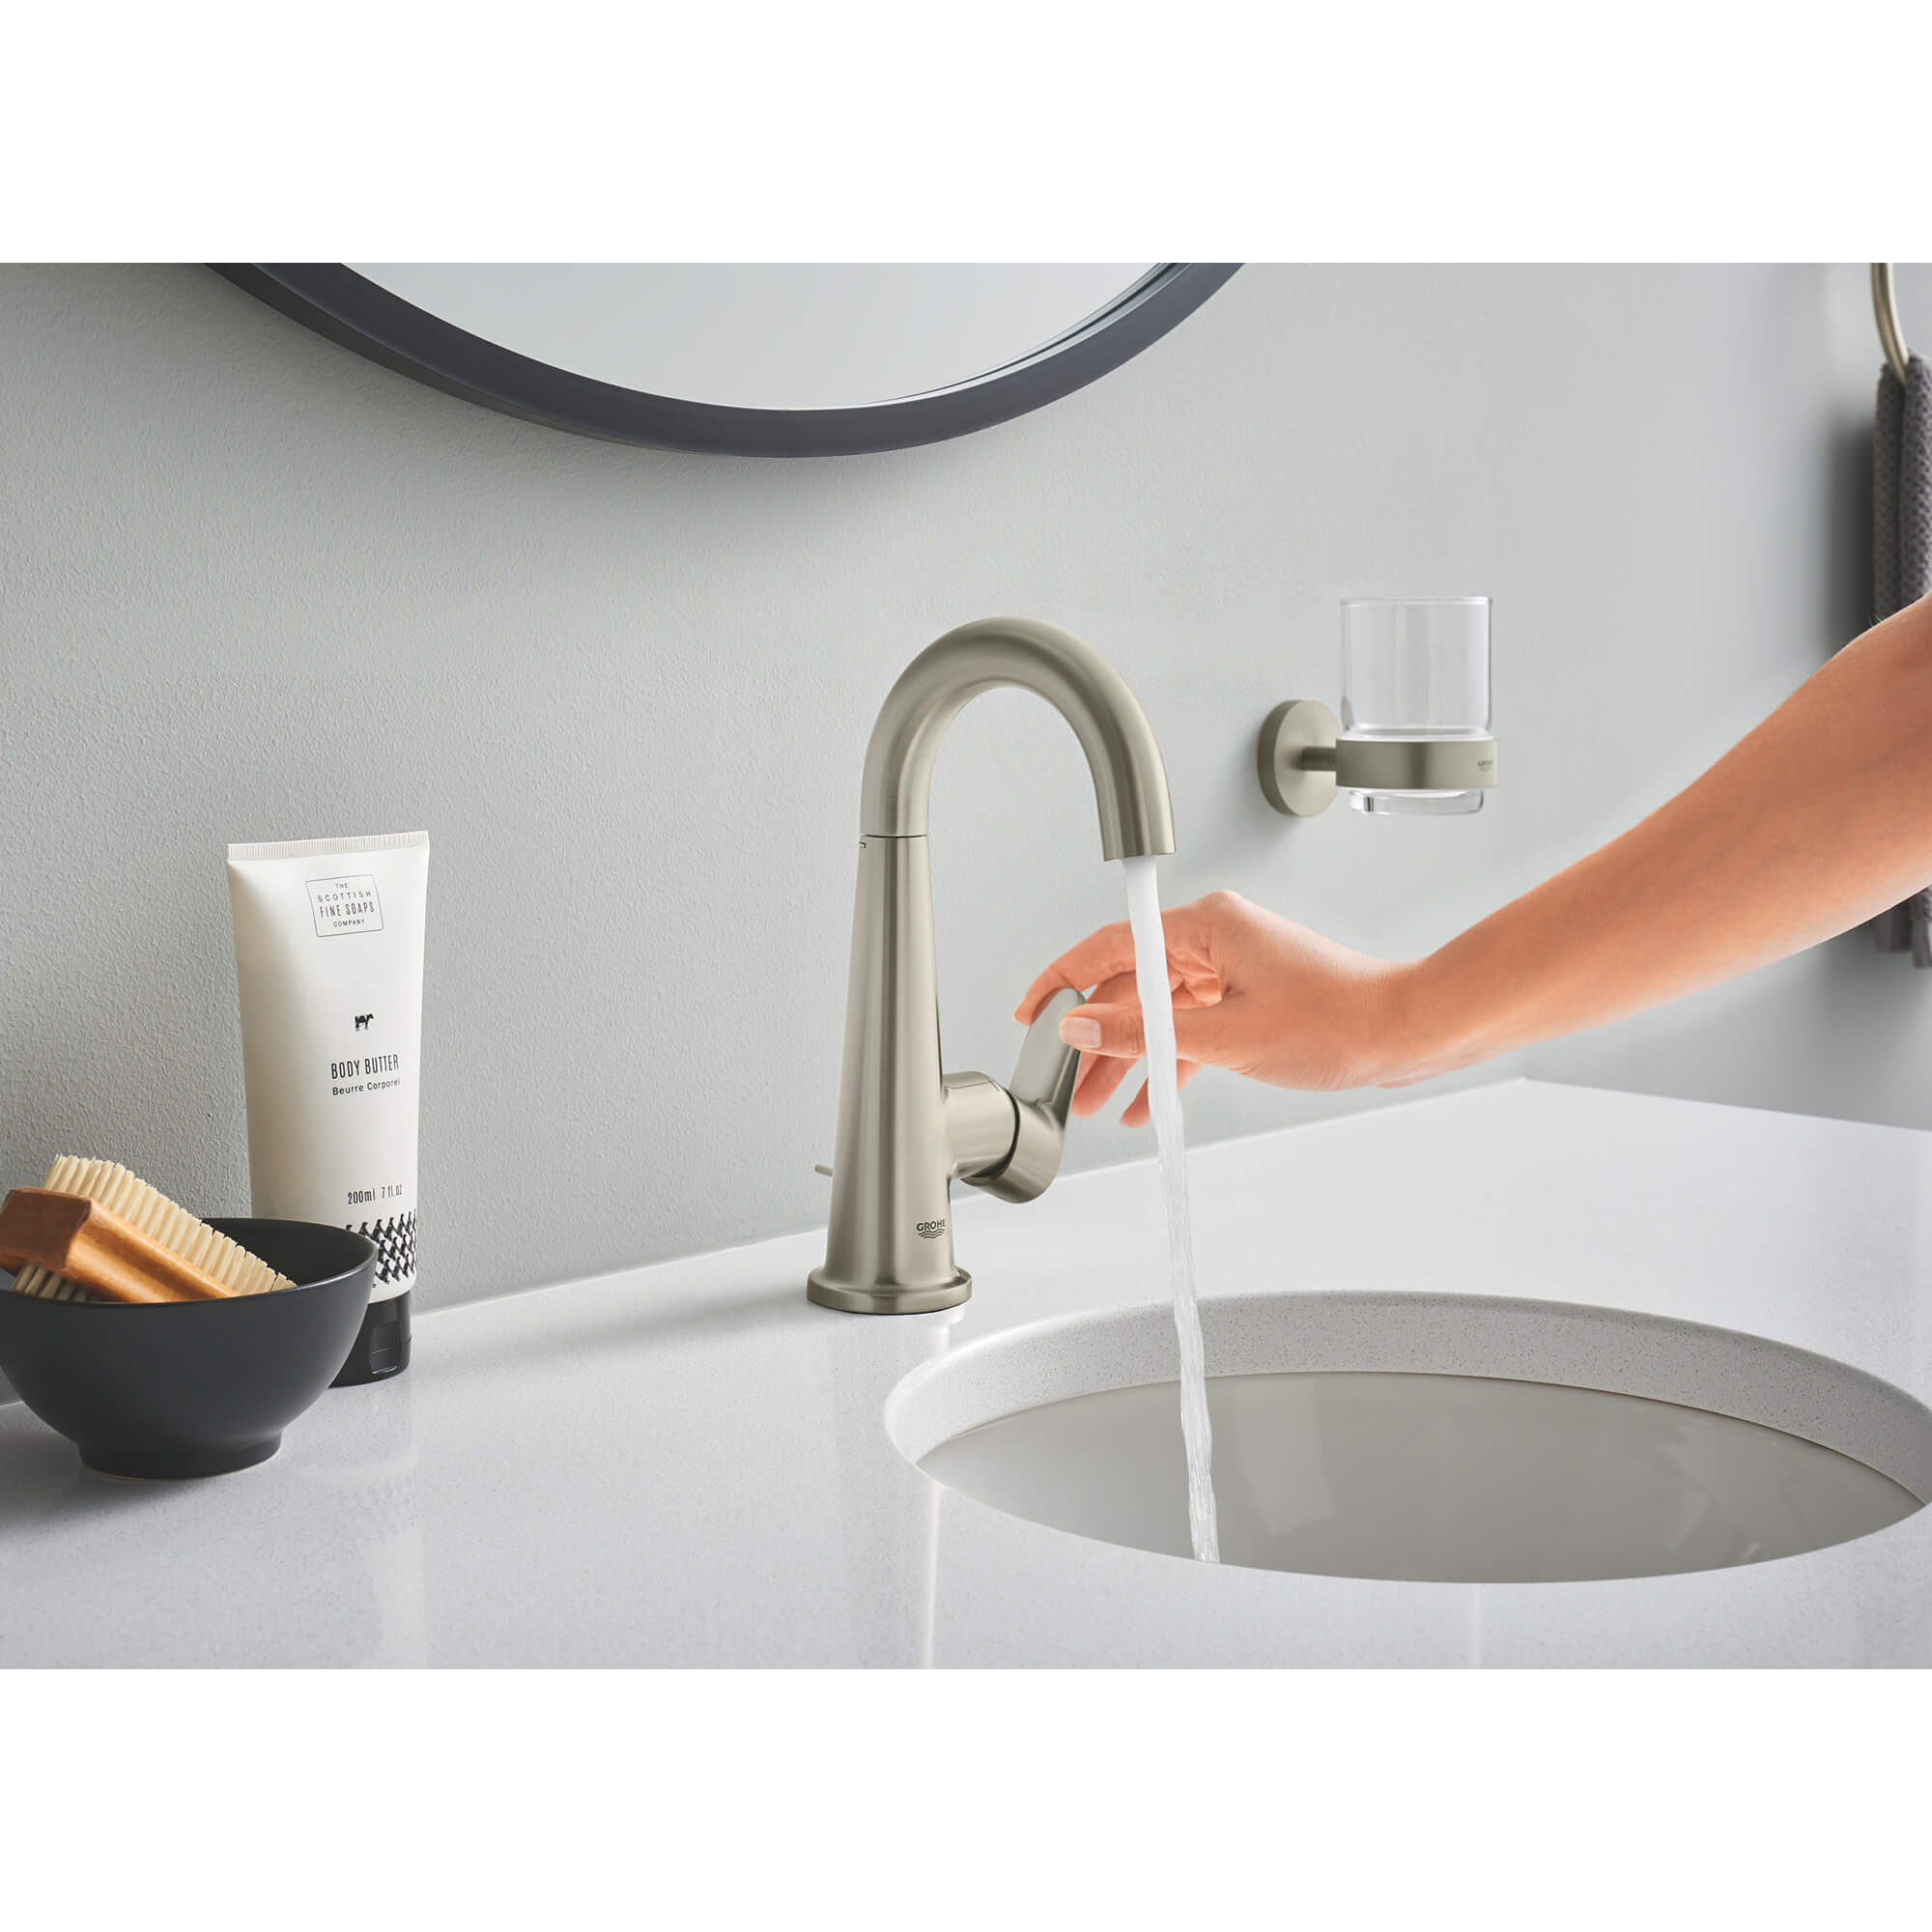 Glass with Holder GROHE BRUSHED NICKEL